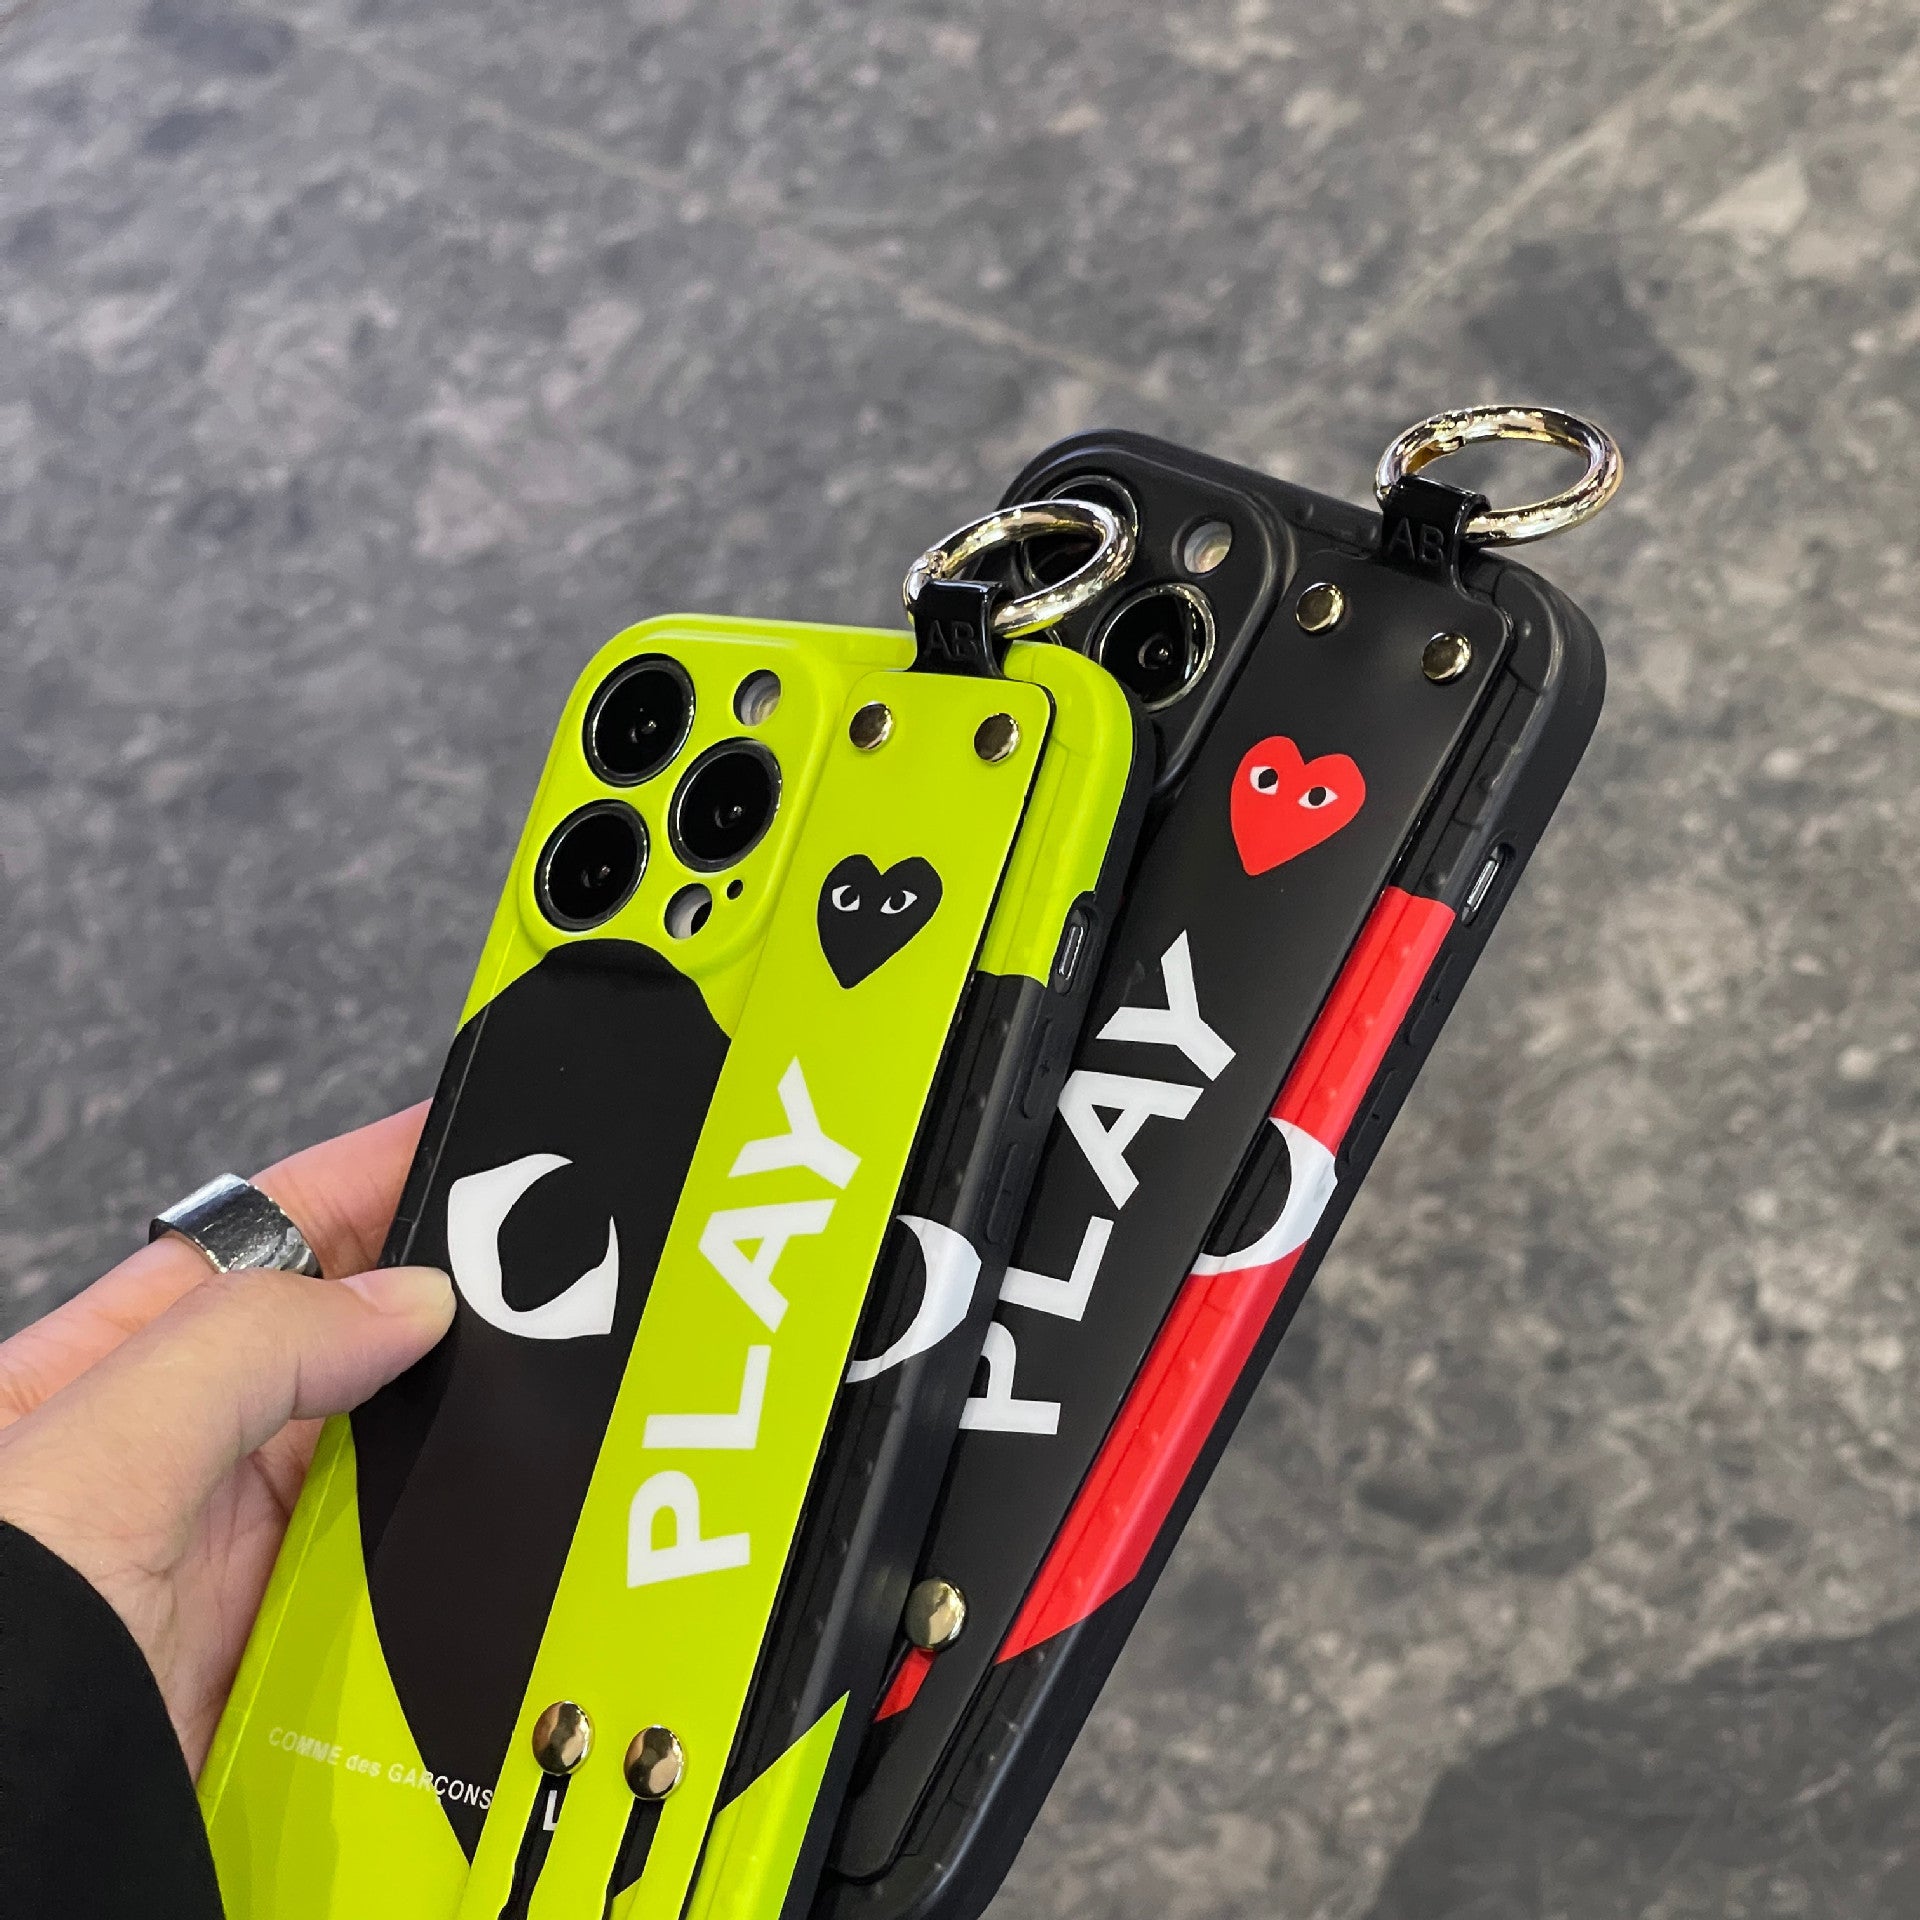 CDG iPhone Case with Wrist Strap Holder